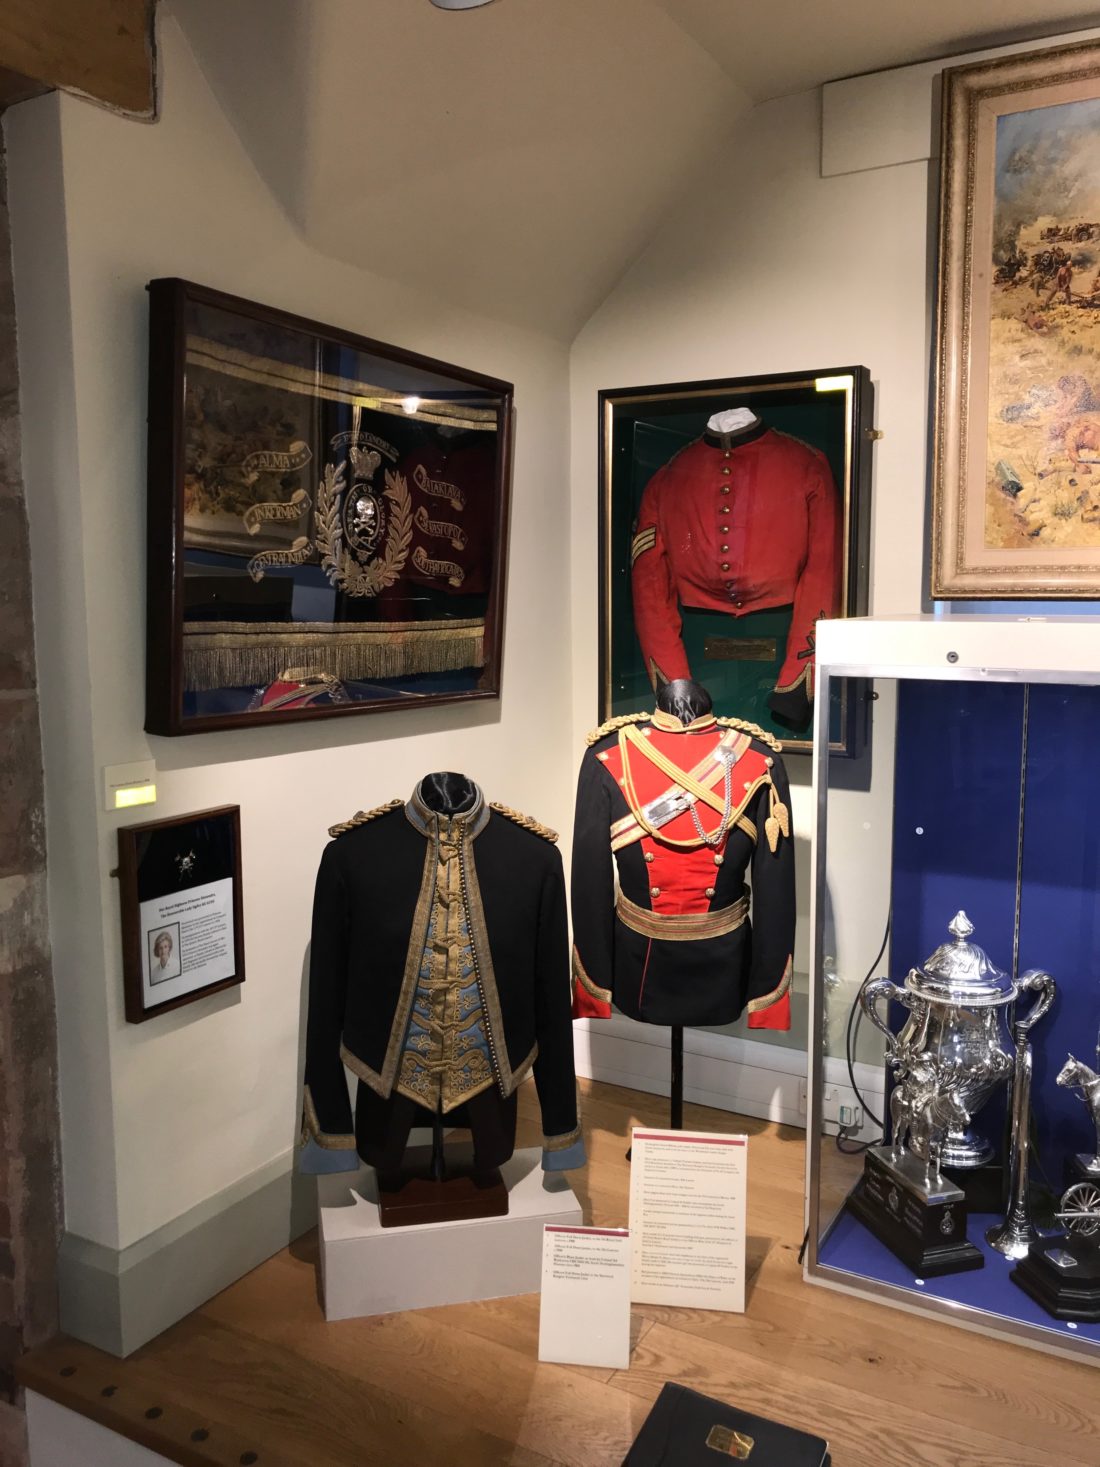 Queens Royal Lancers museum (“Thoresby hall”)